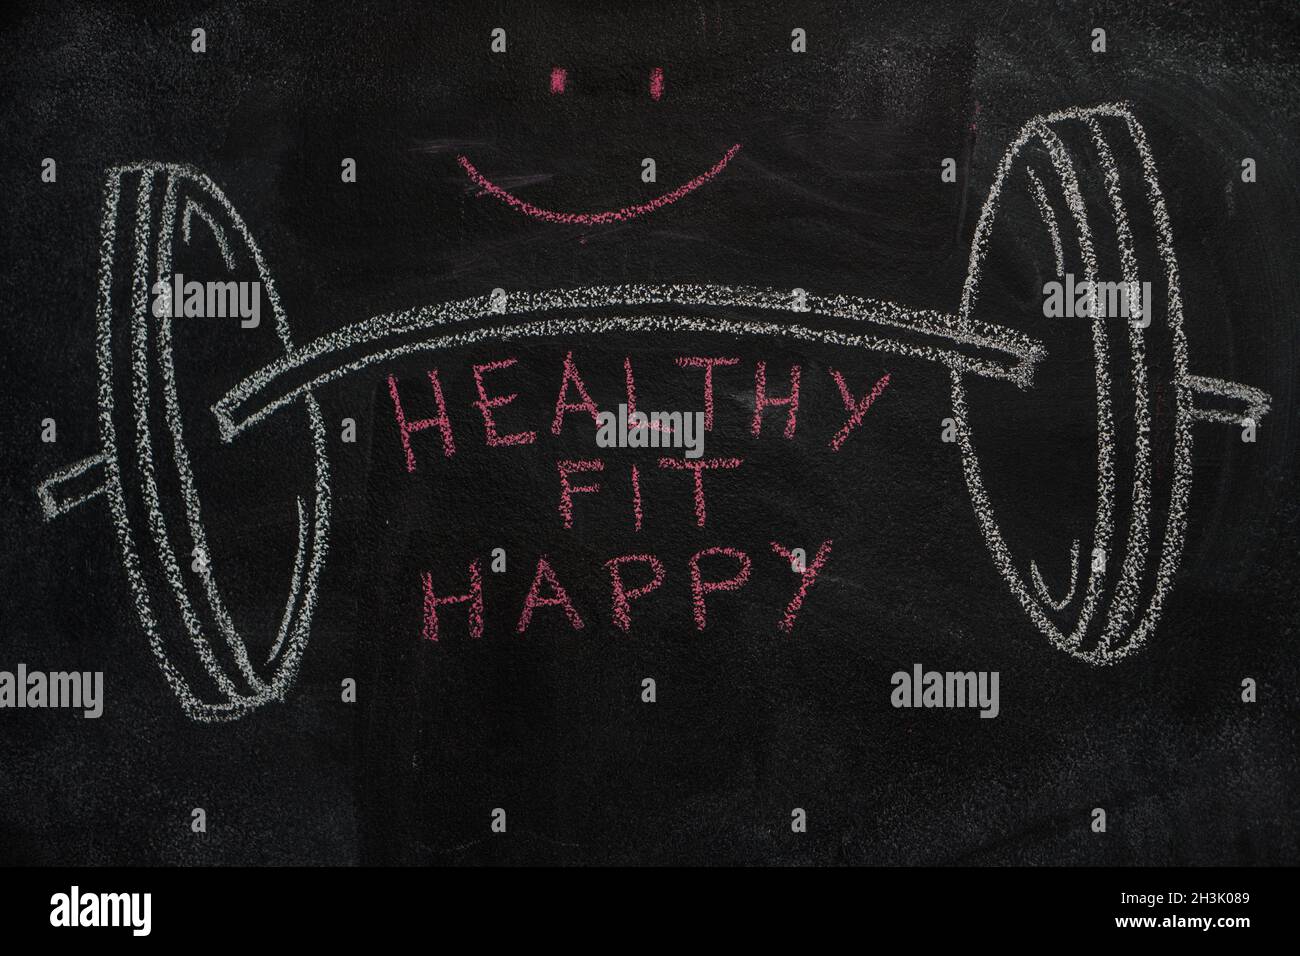 Barbell and healthy, fit, happy words on black chalkboard Stock Photo